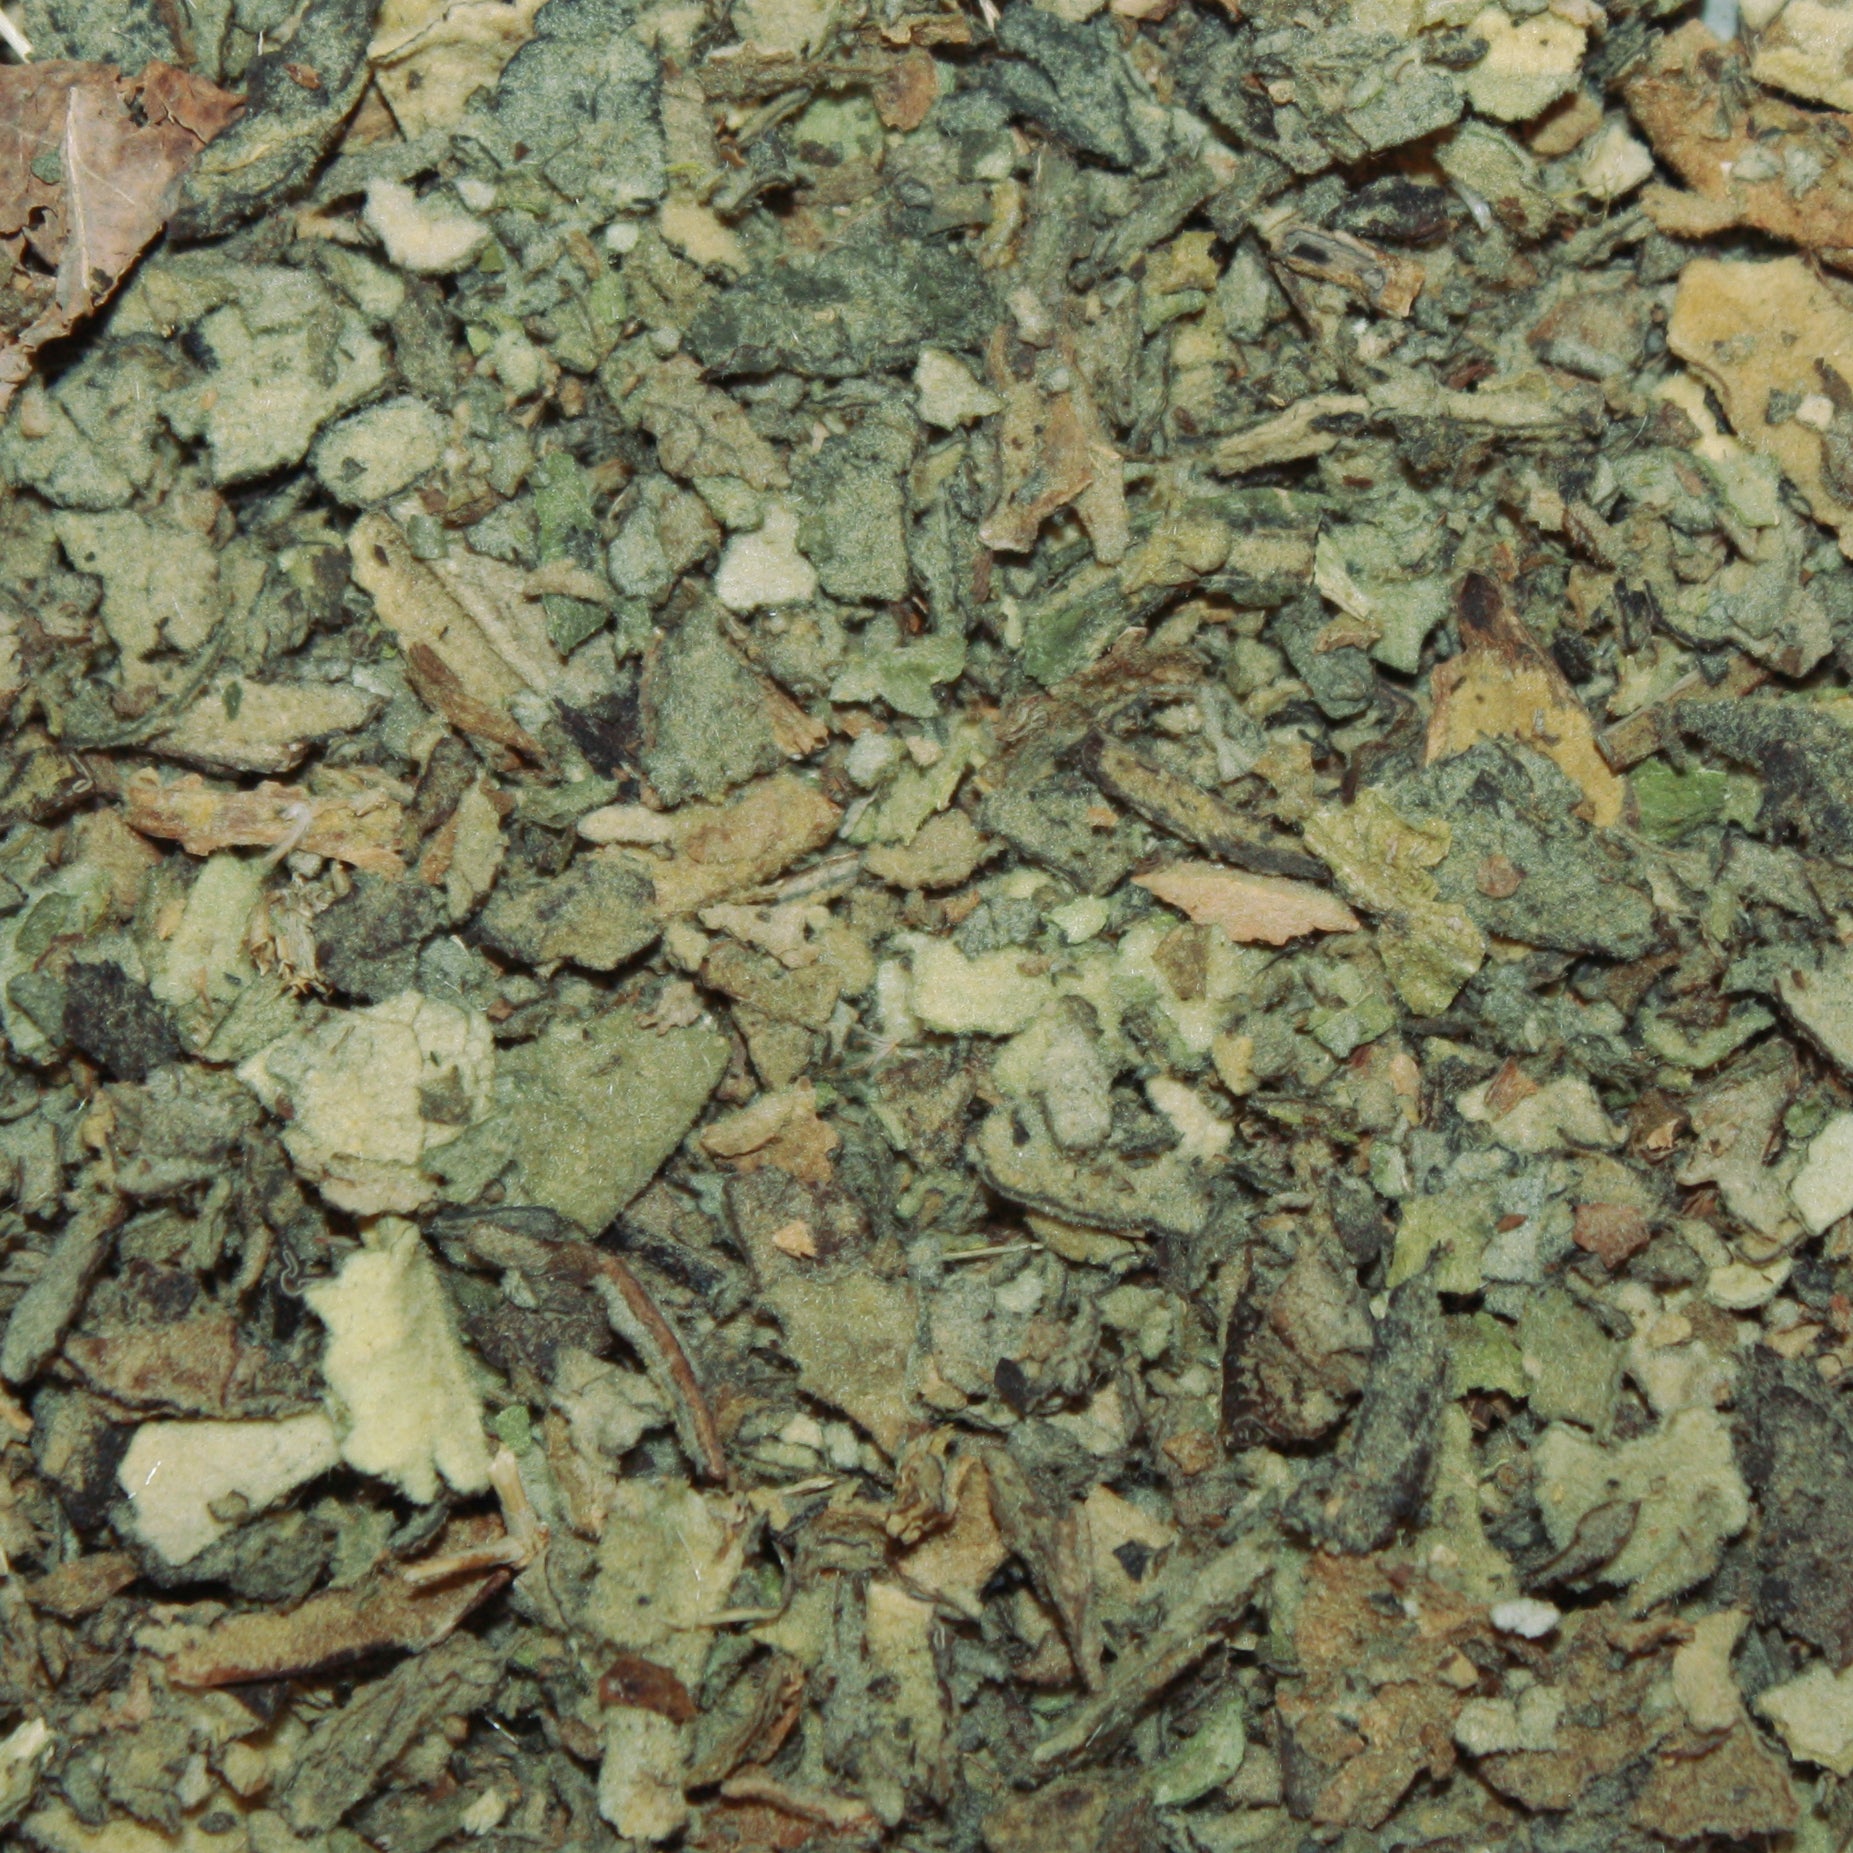 Mullein Leaf is ideal for Protection from nightmares & sorcery, courage, cursing, and invoking spirits